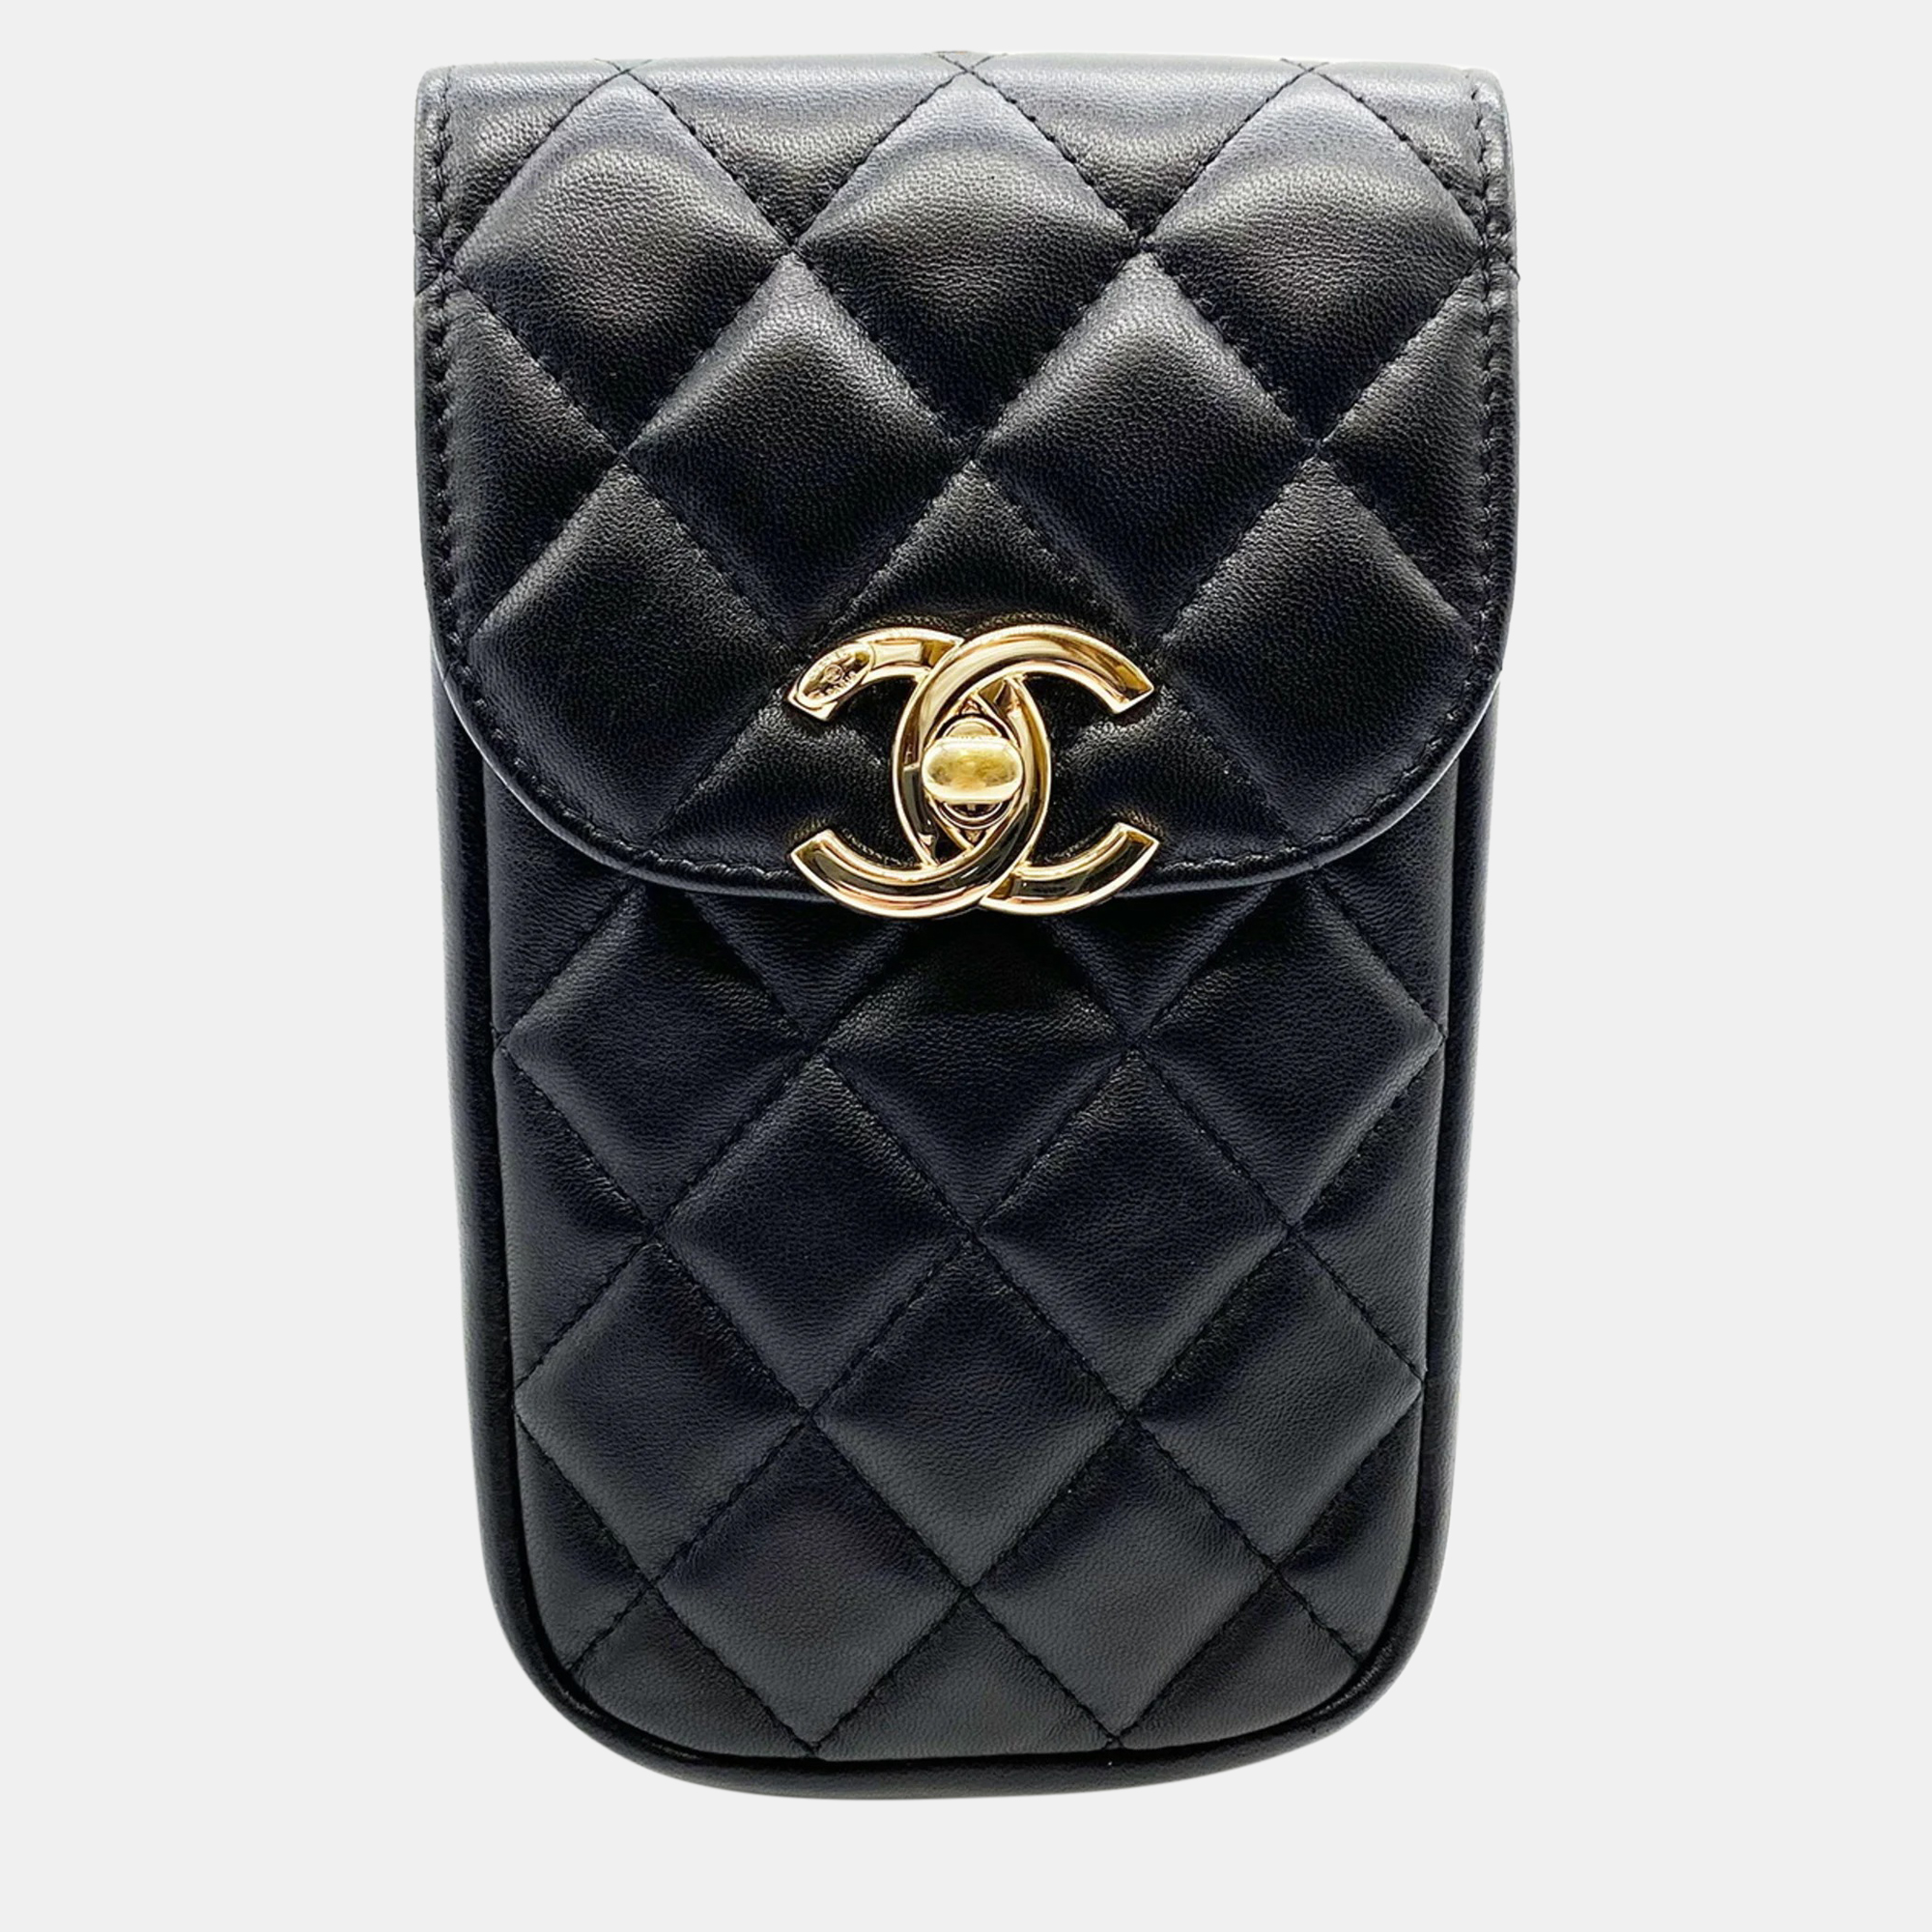 Pre-owned Chanel Black Quilted Leather Phone Case Shoulder Bag